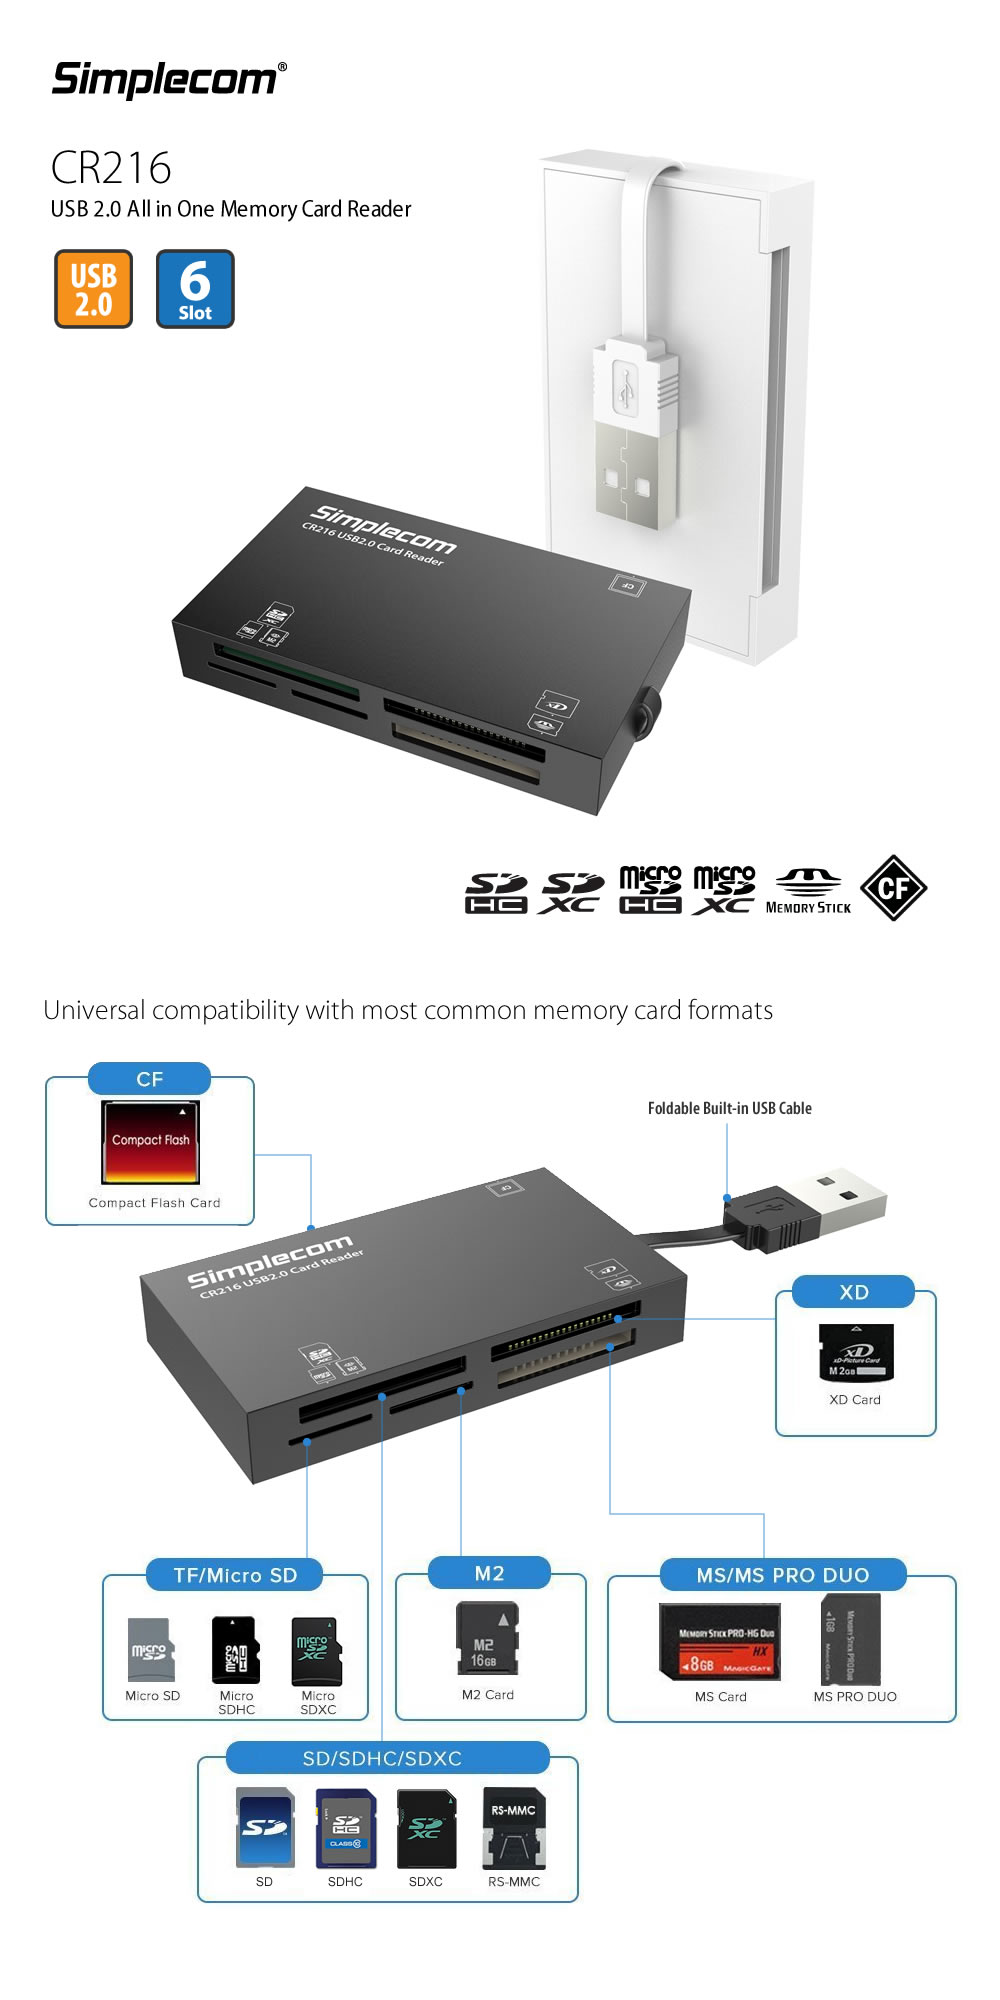 Simplecom CR216 USB 2.0 All in One Memory Card Reader 6 Slot for MS M2 CF XD Micro SD HC SDXC White 4